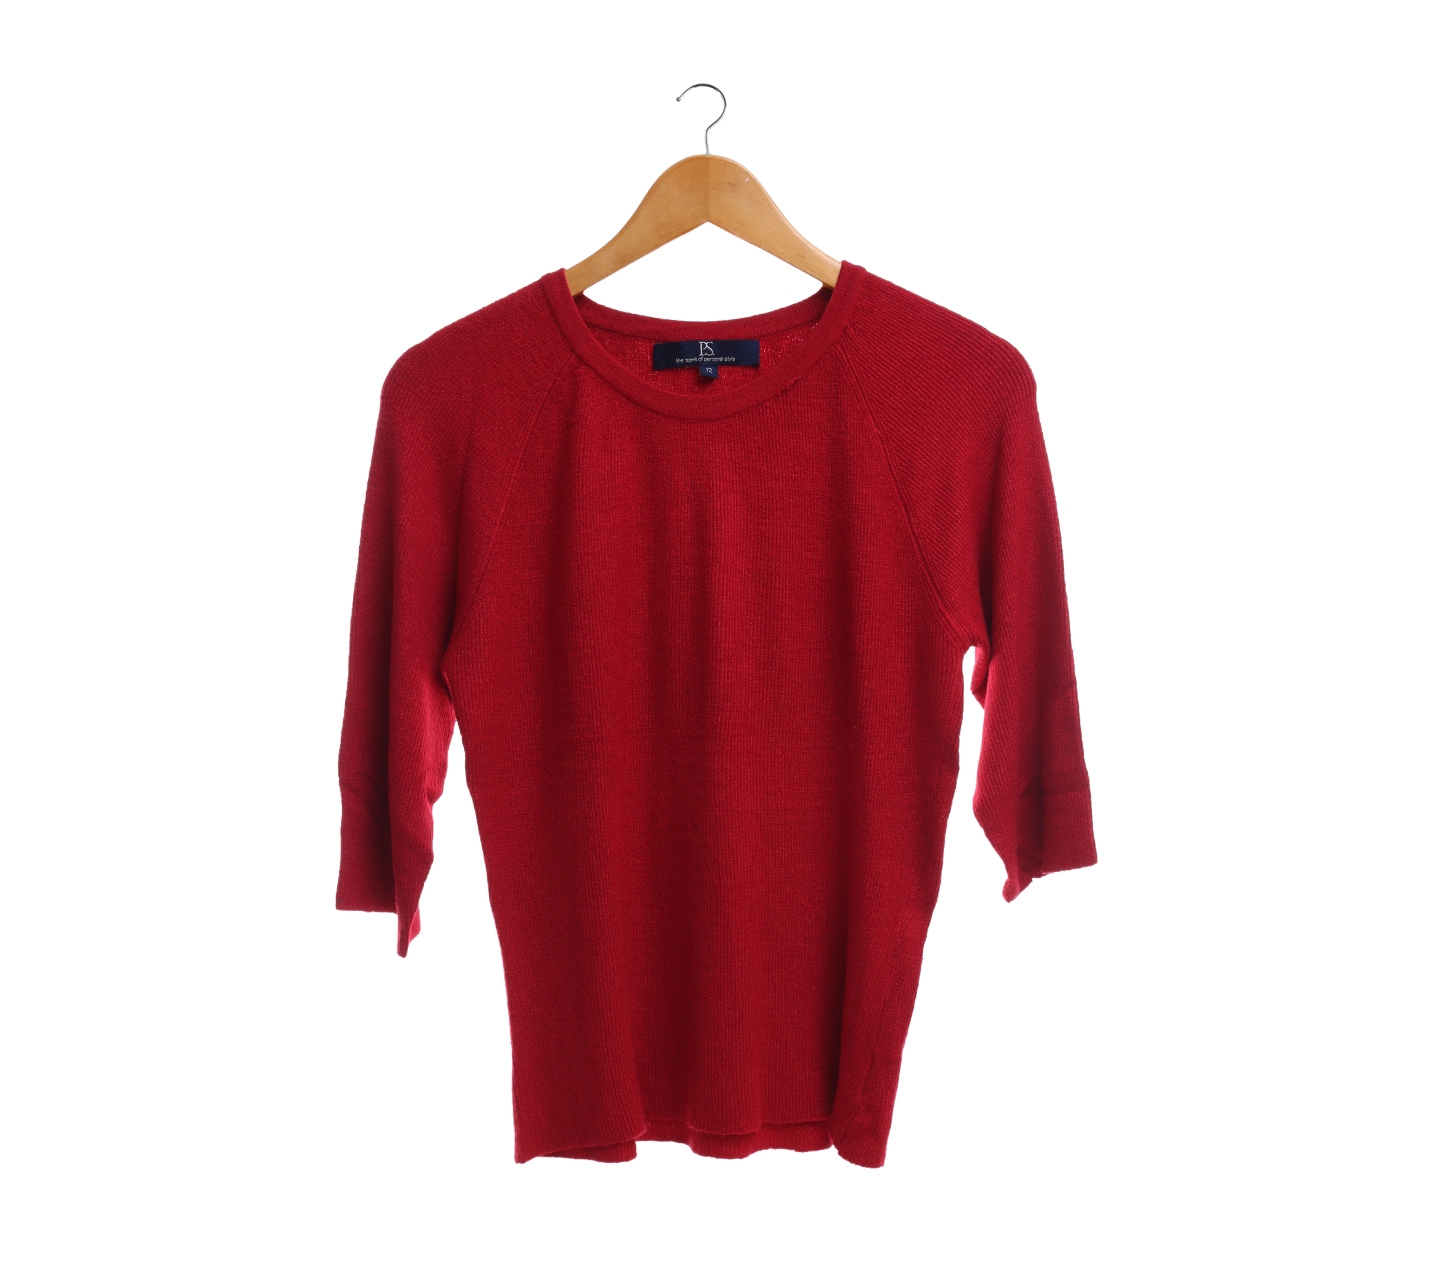 P.S. The Spirit Of Personal Style Red Knit Blouse